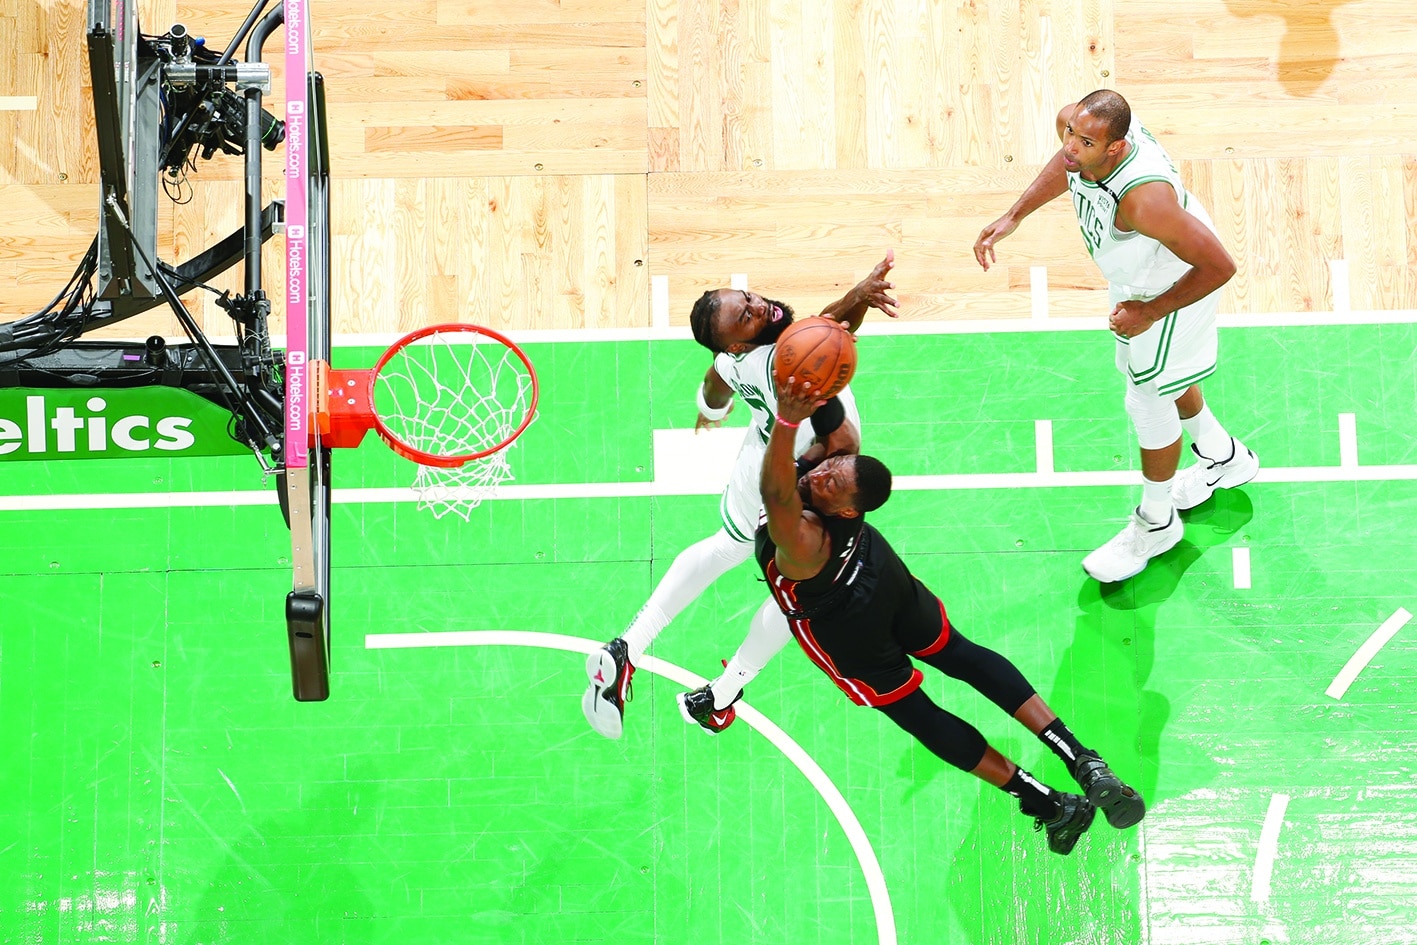 BOSTON: Bam Adebayo #13 of the Miami Heat dunks the ball against the Boston Celtics during Game 3 of the 2022 NBA Playoffs Eastern Conference Finals on May 21, 2022. - AFPn